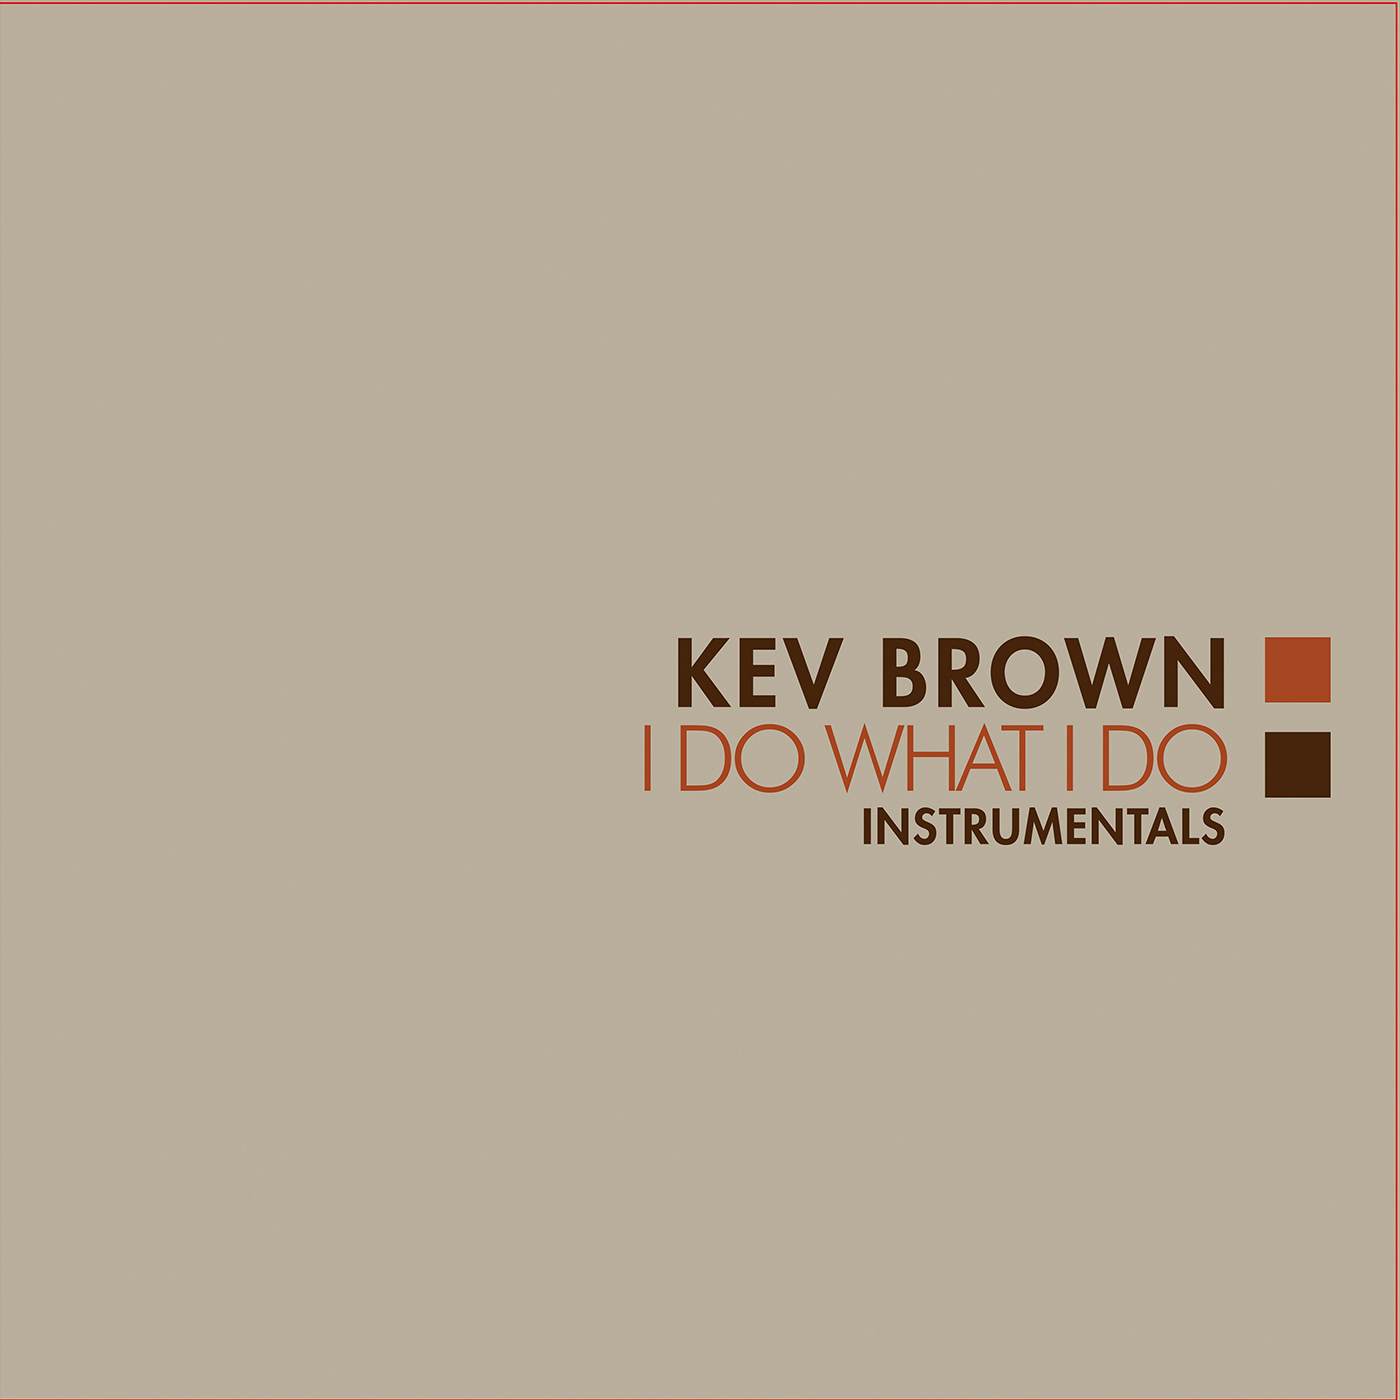 Kev Brown I DO WHAT I DO (INSTRUMENTALS) - Limited Edition Orange Colored Vinyl Record